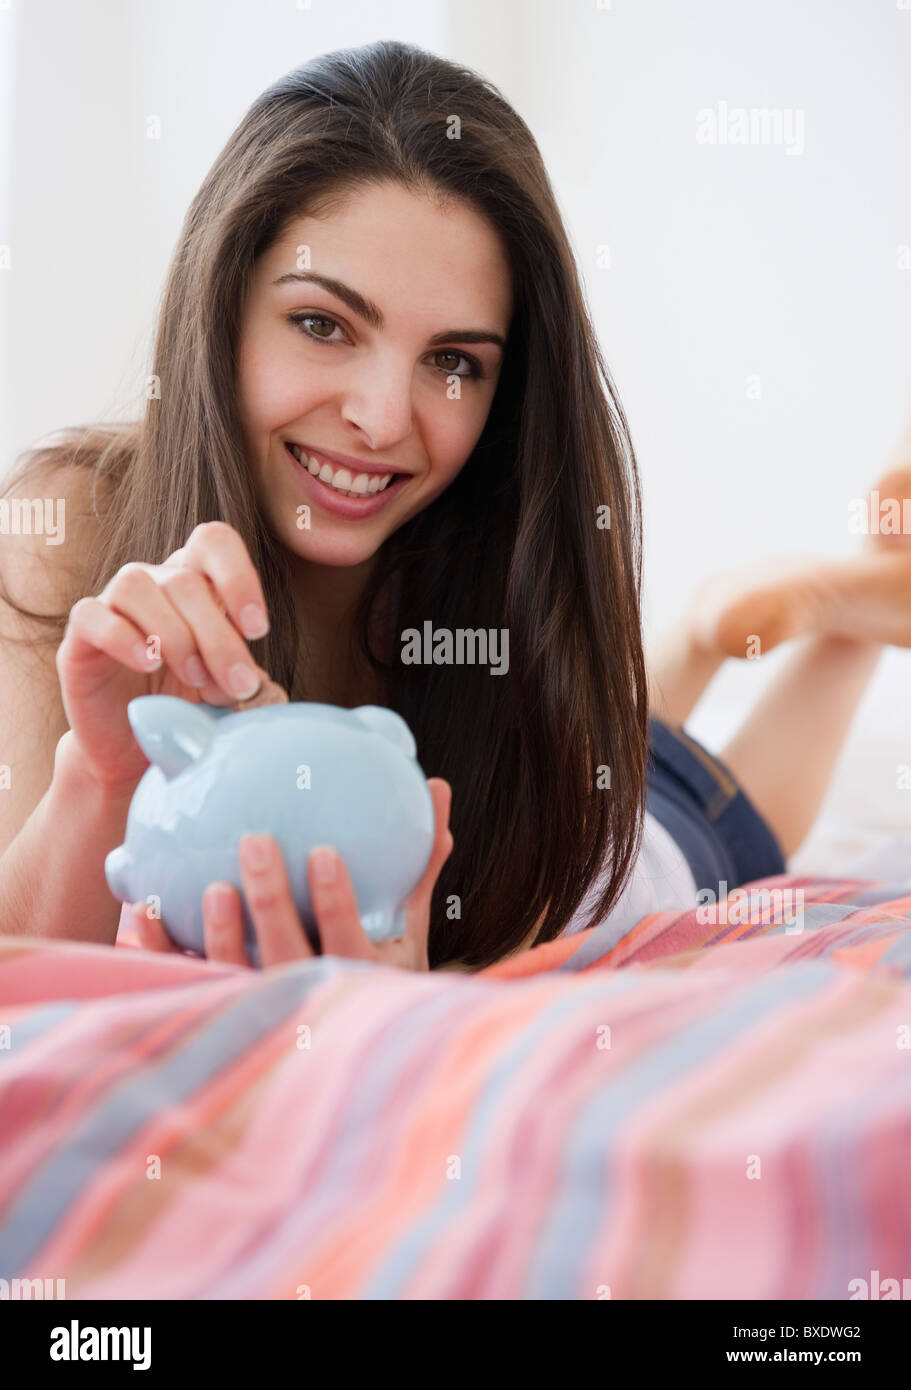 Woman putting coins in piggy bank Stock Photo